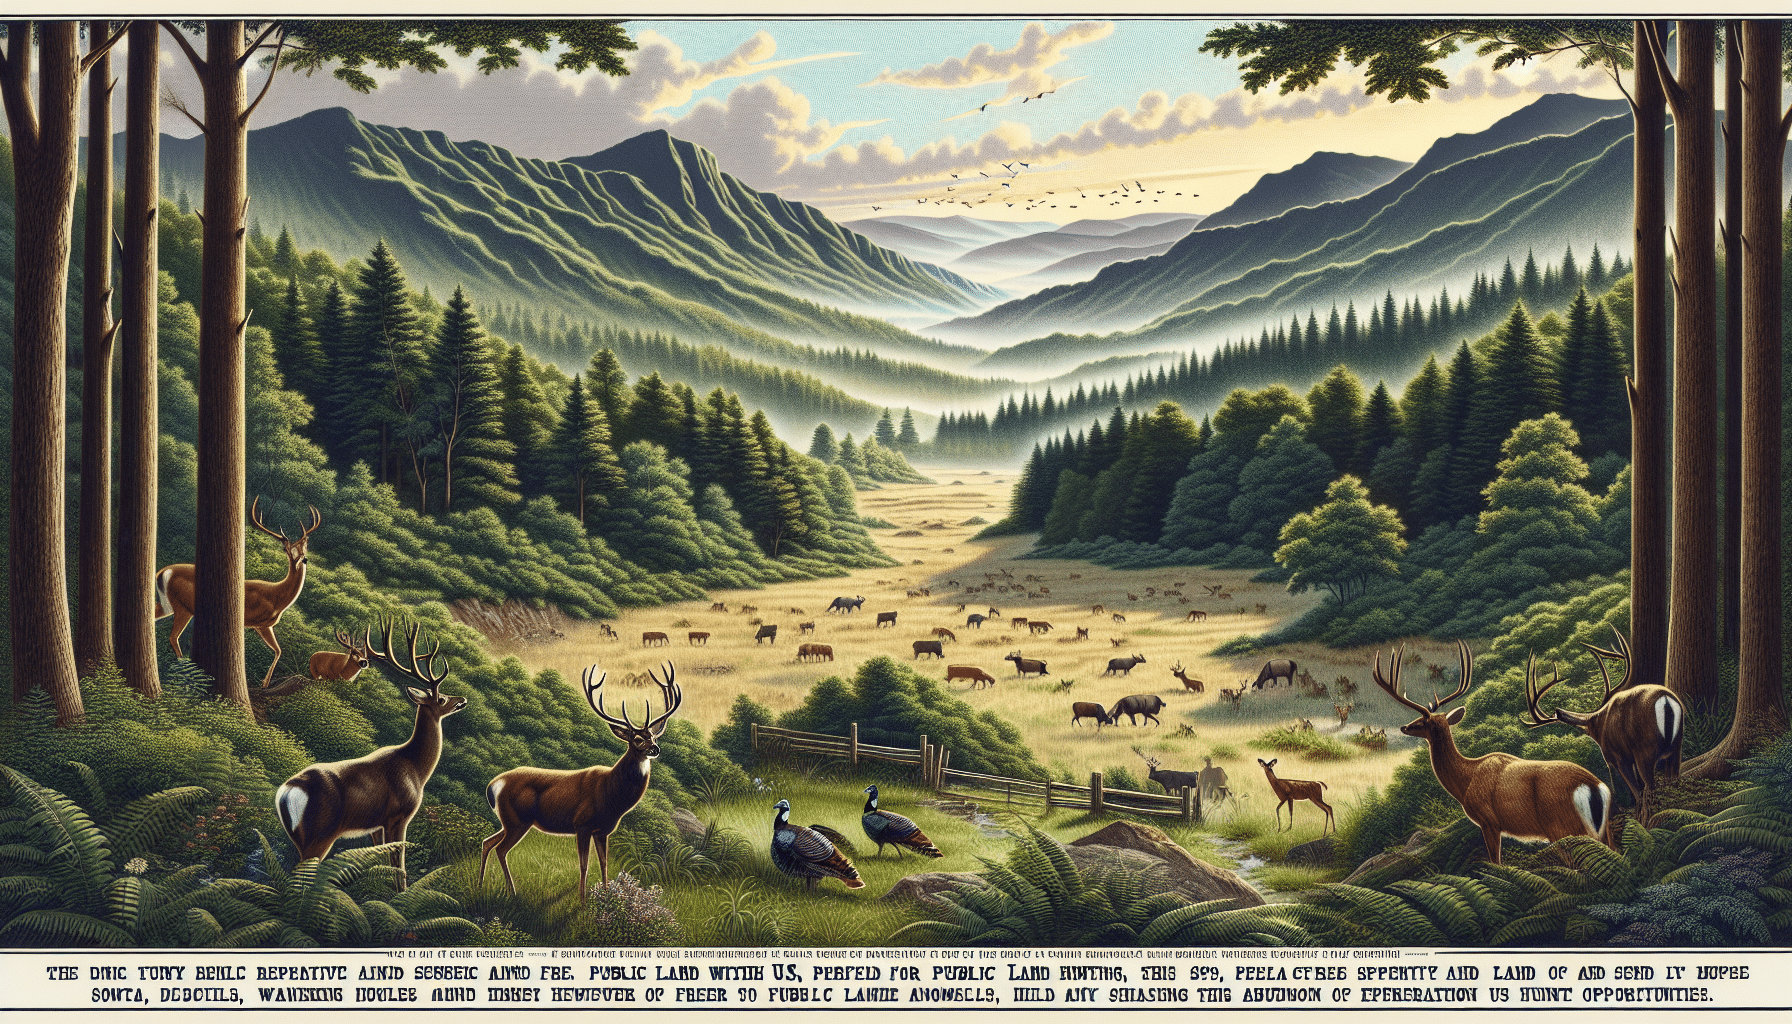 Illustrate an expansive and serene public land area within the U.S., perfect for free-range hunting. The scenery should reflect a variety of natural terrains -- dense forests, rolling hills, and hidden clearings, providing shelter for a diverse range of game animals. Deer, elk, turkeys, and other wildlife wander freely, signalling the abundance of hunting opportunities. Please avoid the inclusion of any human figures, text, brand names or logos. This image aims to depict a tranquil and forested environment filled with potential exploration and hunting spots, irrespective of any specific location.